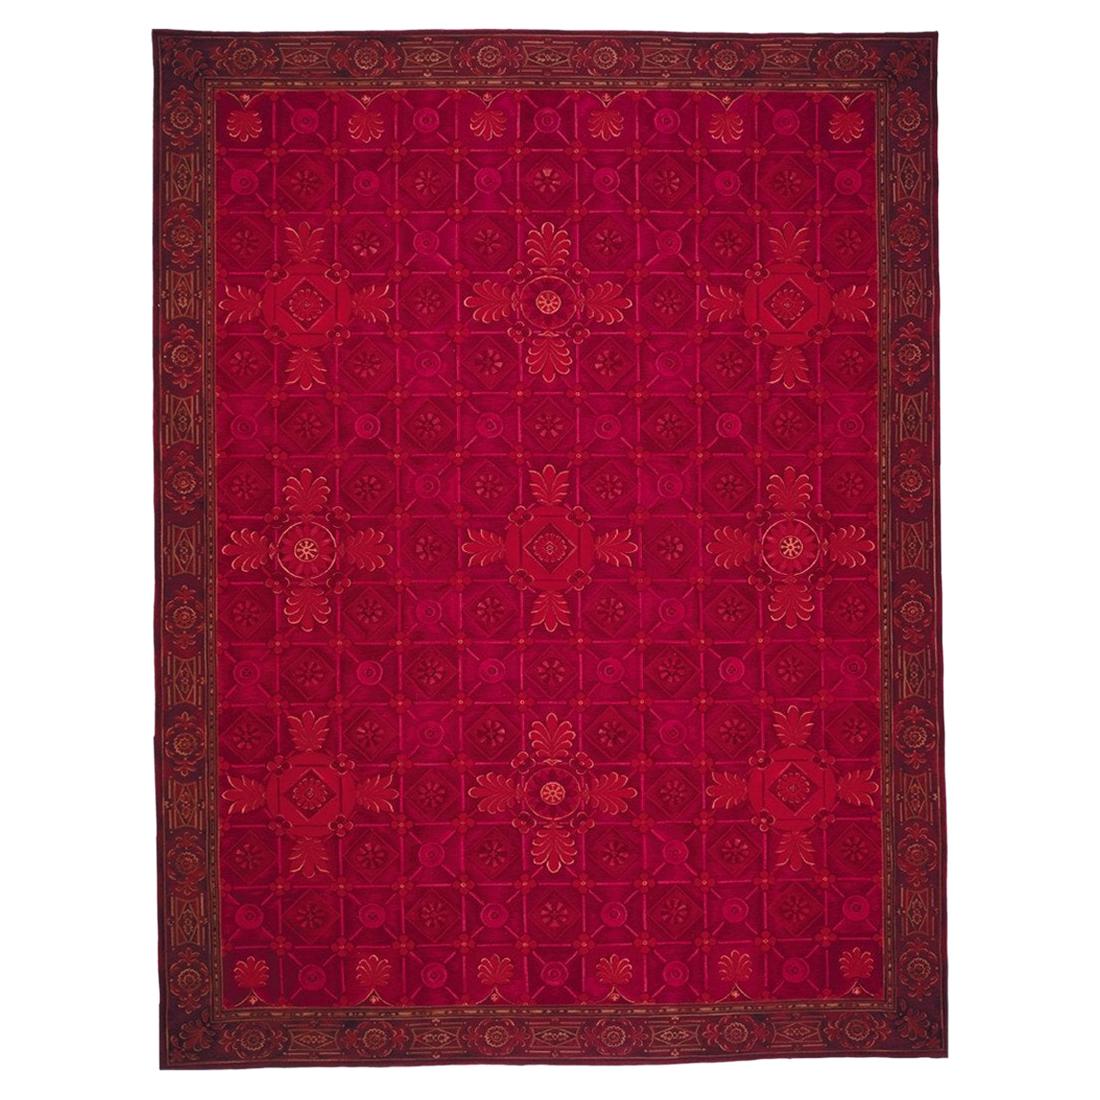 Oversize Handwoven Wool Area Rug  14'2 x 19'4 For Sale